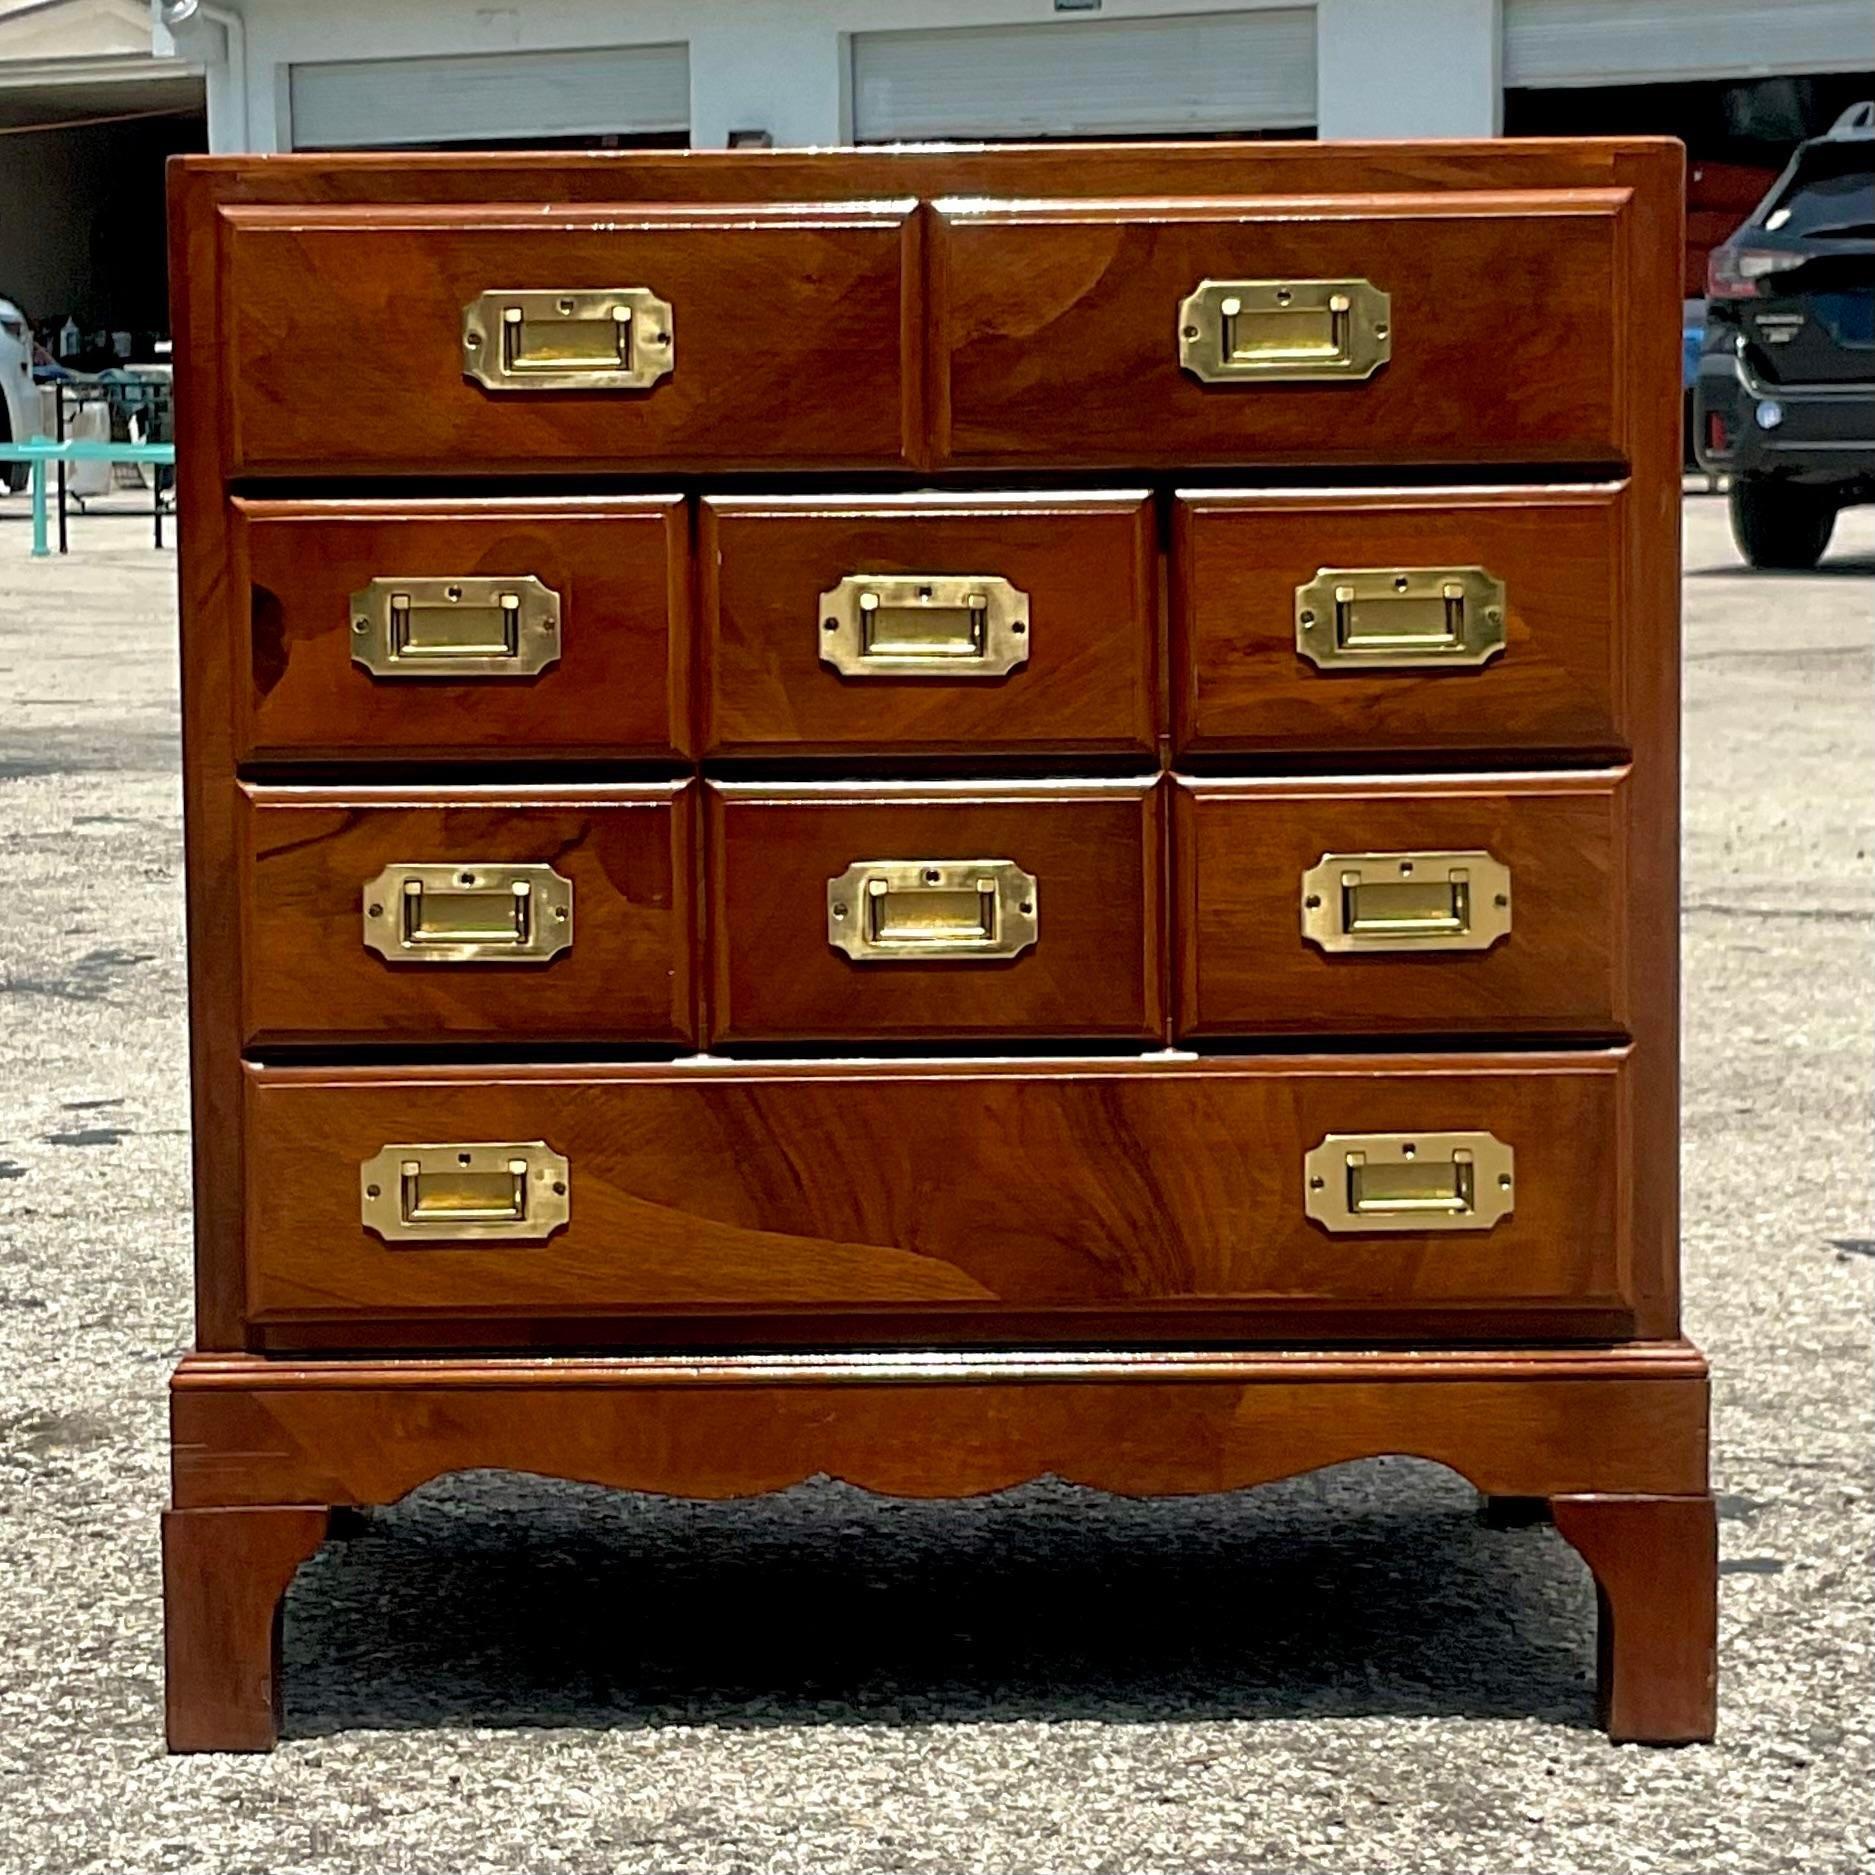 A gorgeous vintage Petite Campaign chest of drawers. A chic little cabinet with a beautiful patchwork design. Classic campaign brass hardware. Finished on all sides so sits beautifully in an open space. A real workhorse that can be used as a side